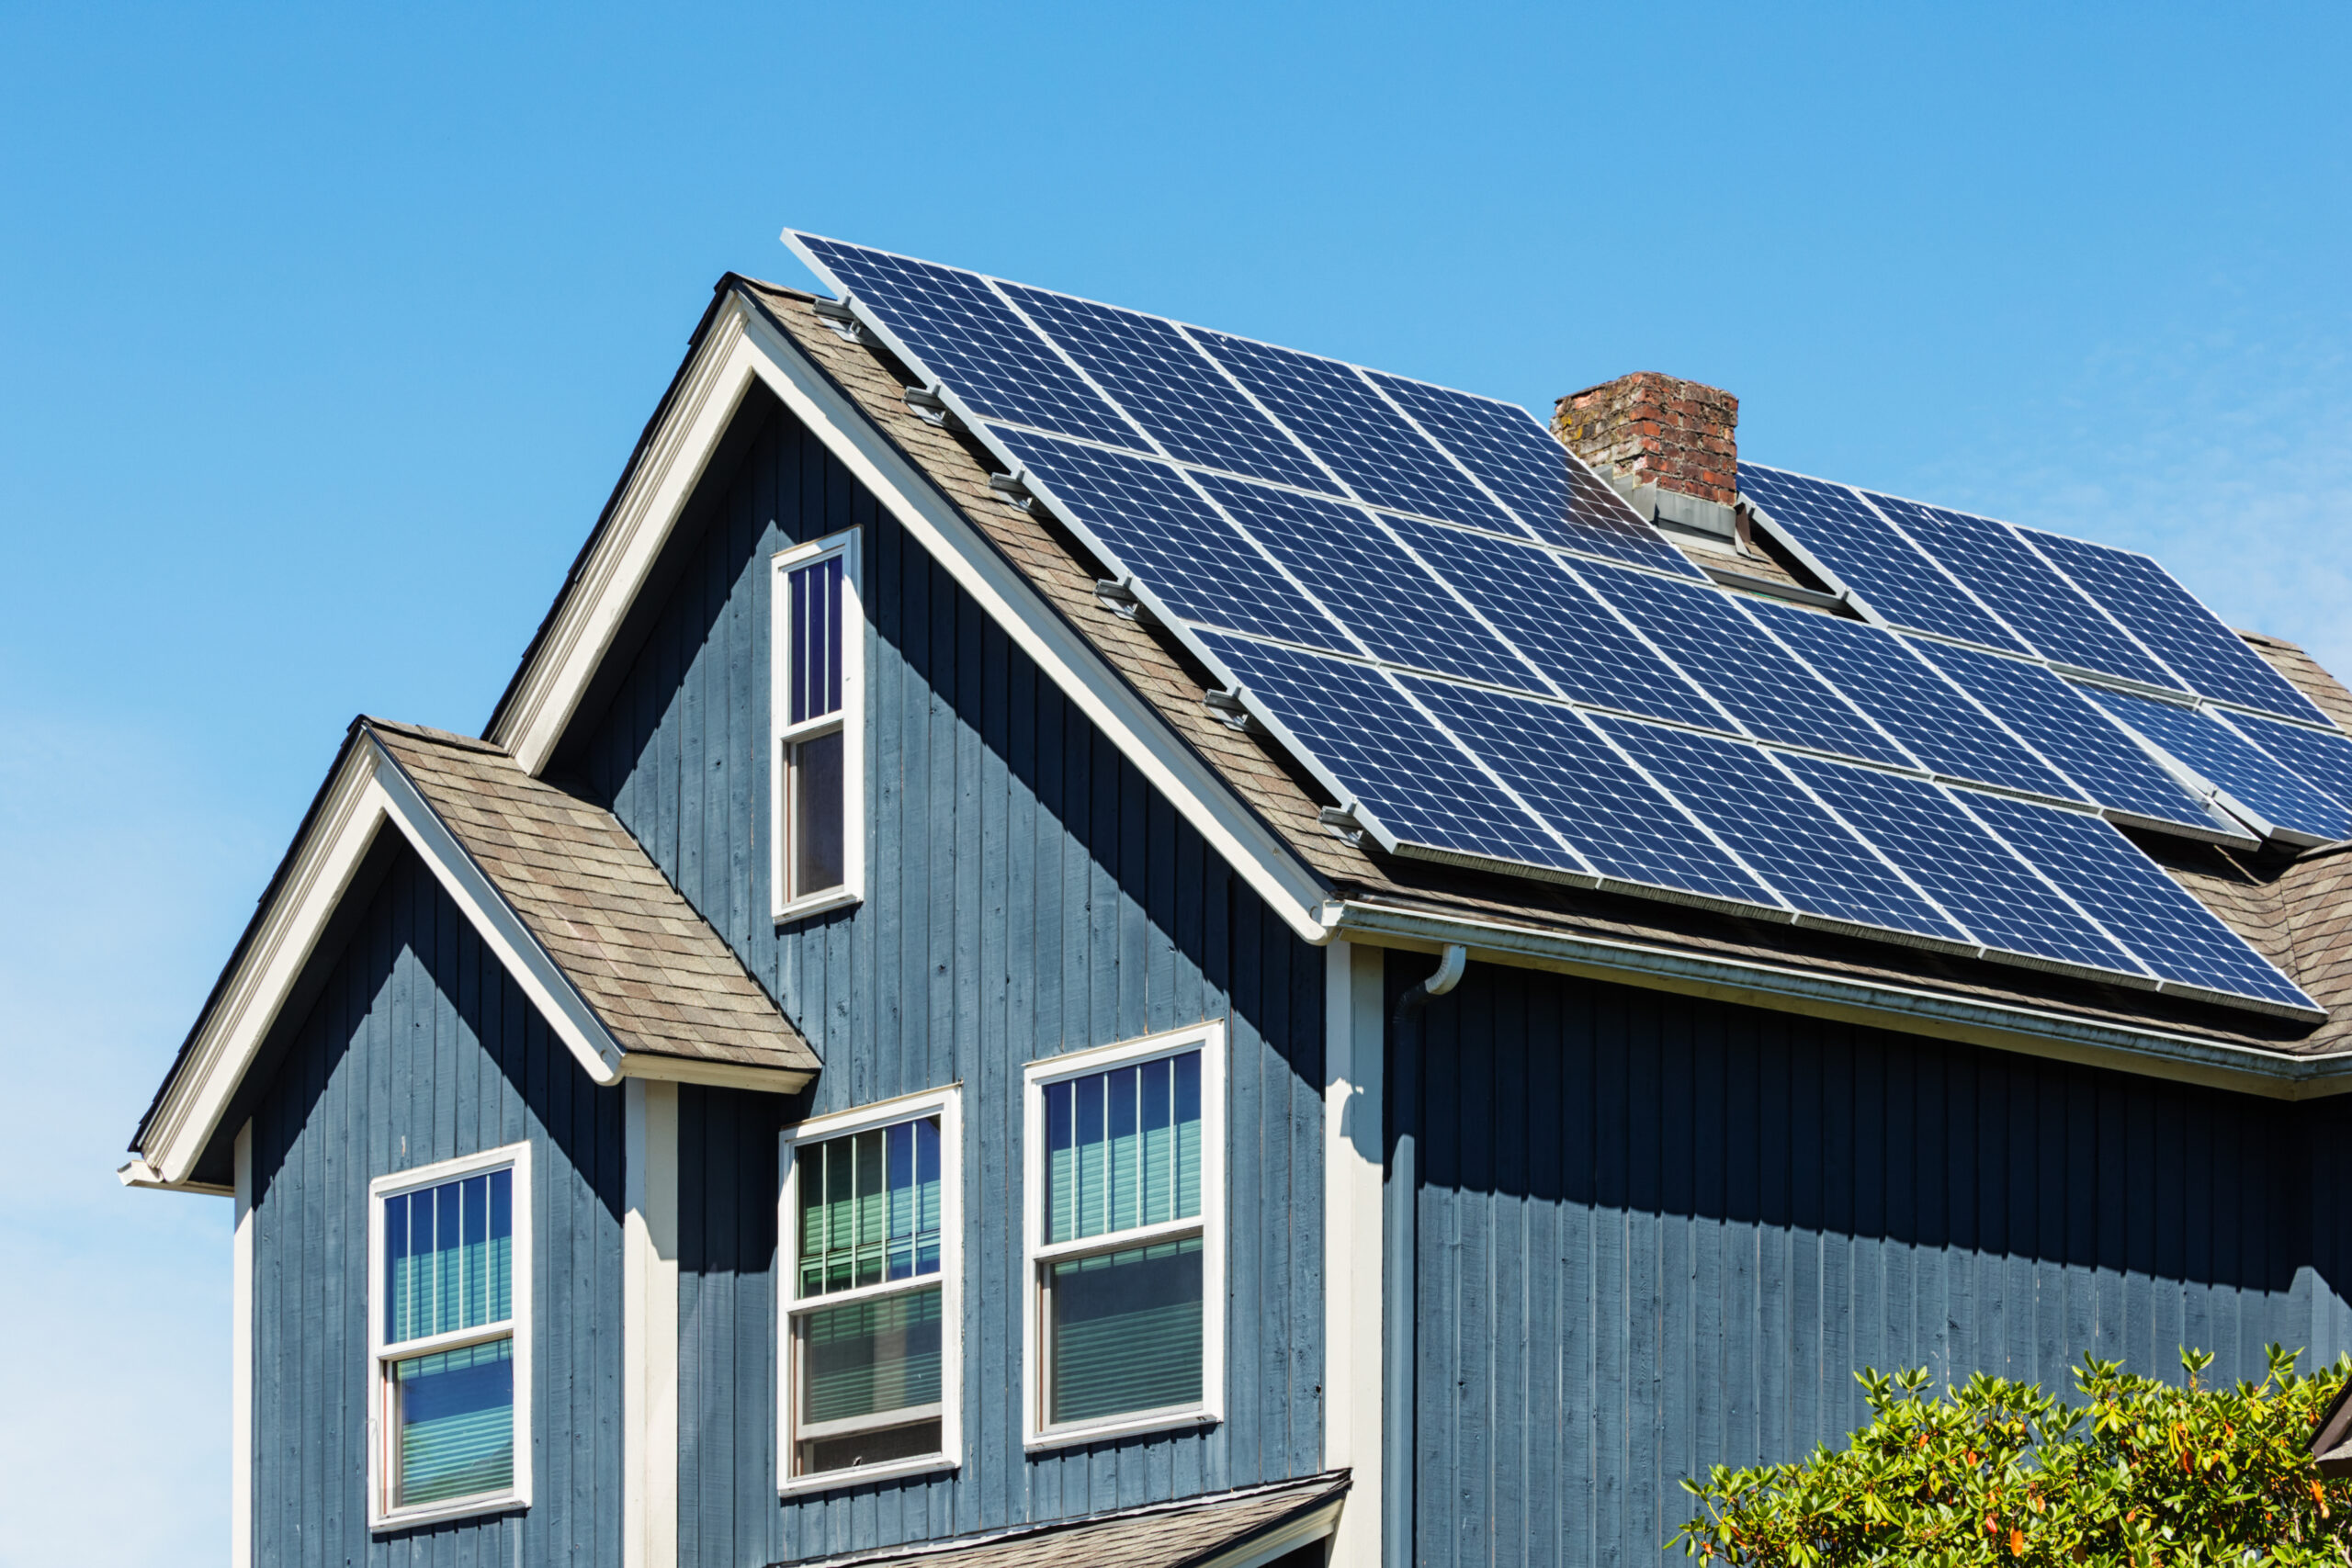 Photo of a small--town American home with energy-efficient solar panels on the roof.